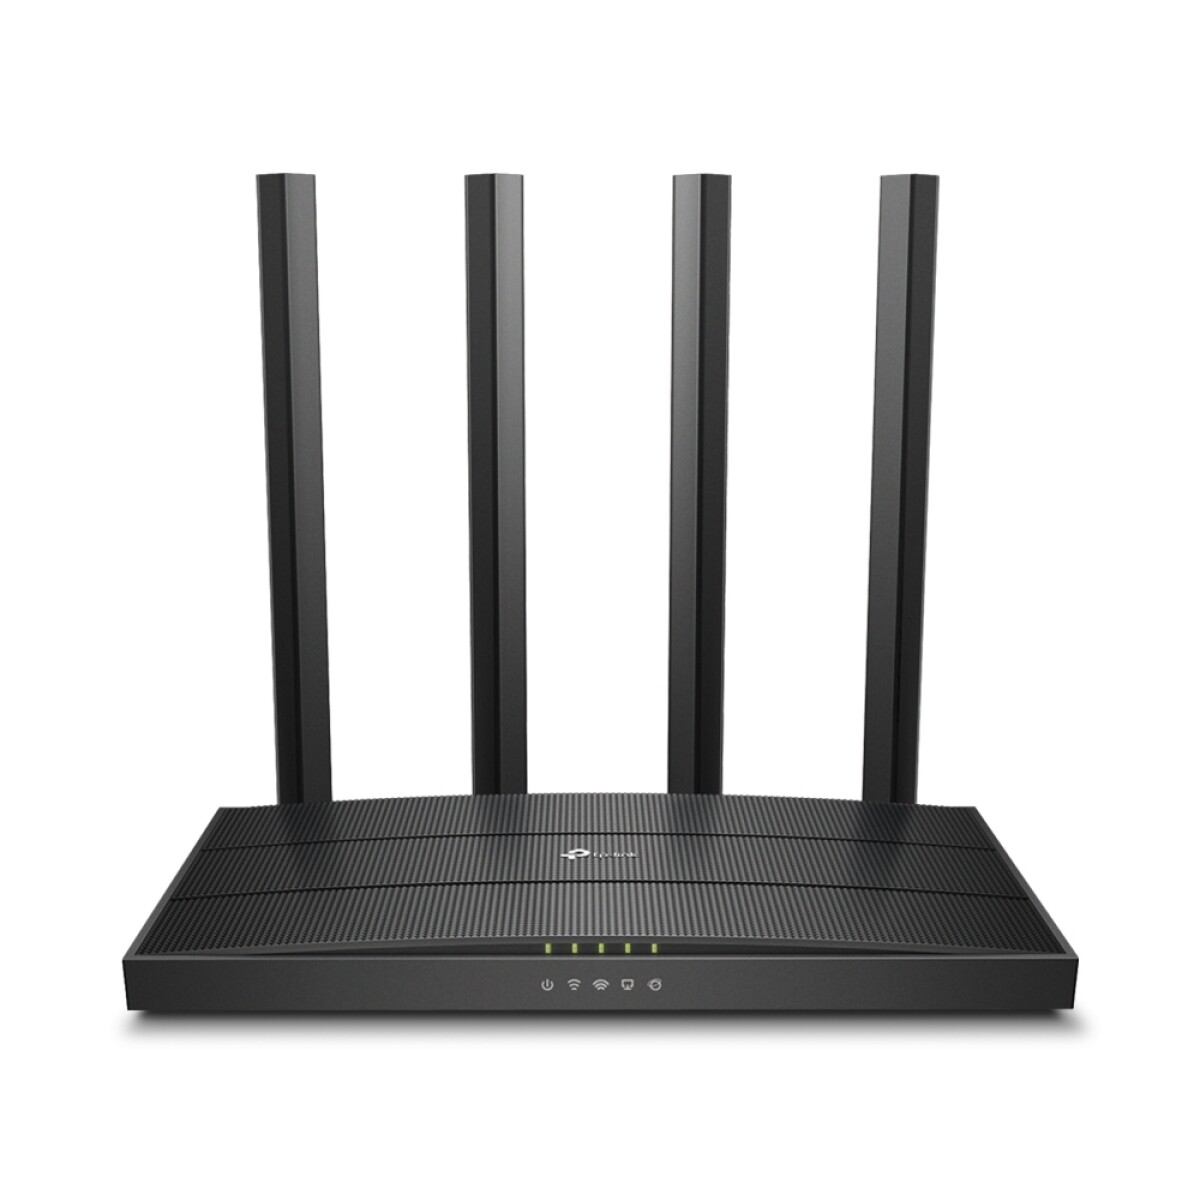 Router Tp-Link wireless Archer C80 dual band AC1900 - Unica 